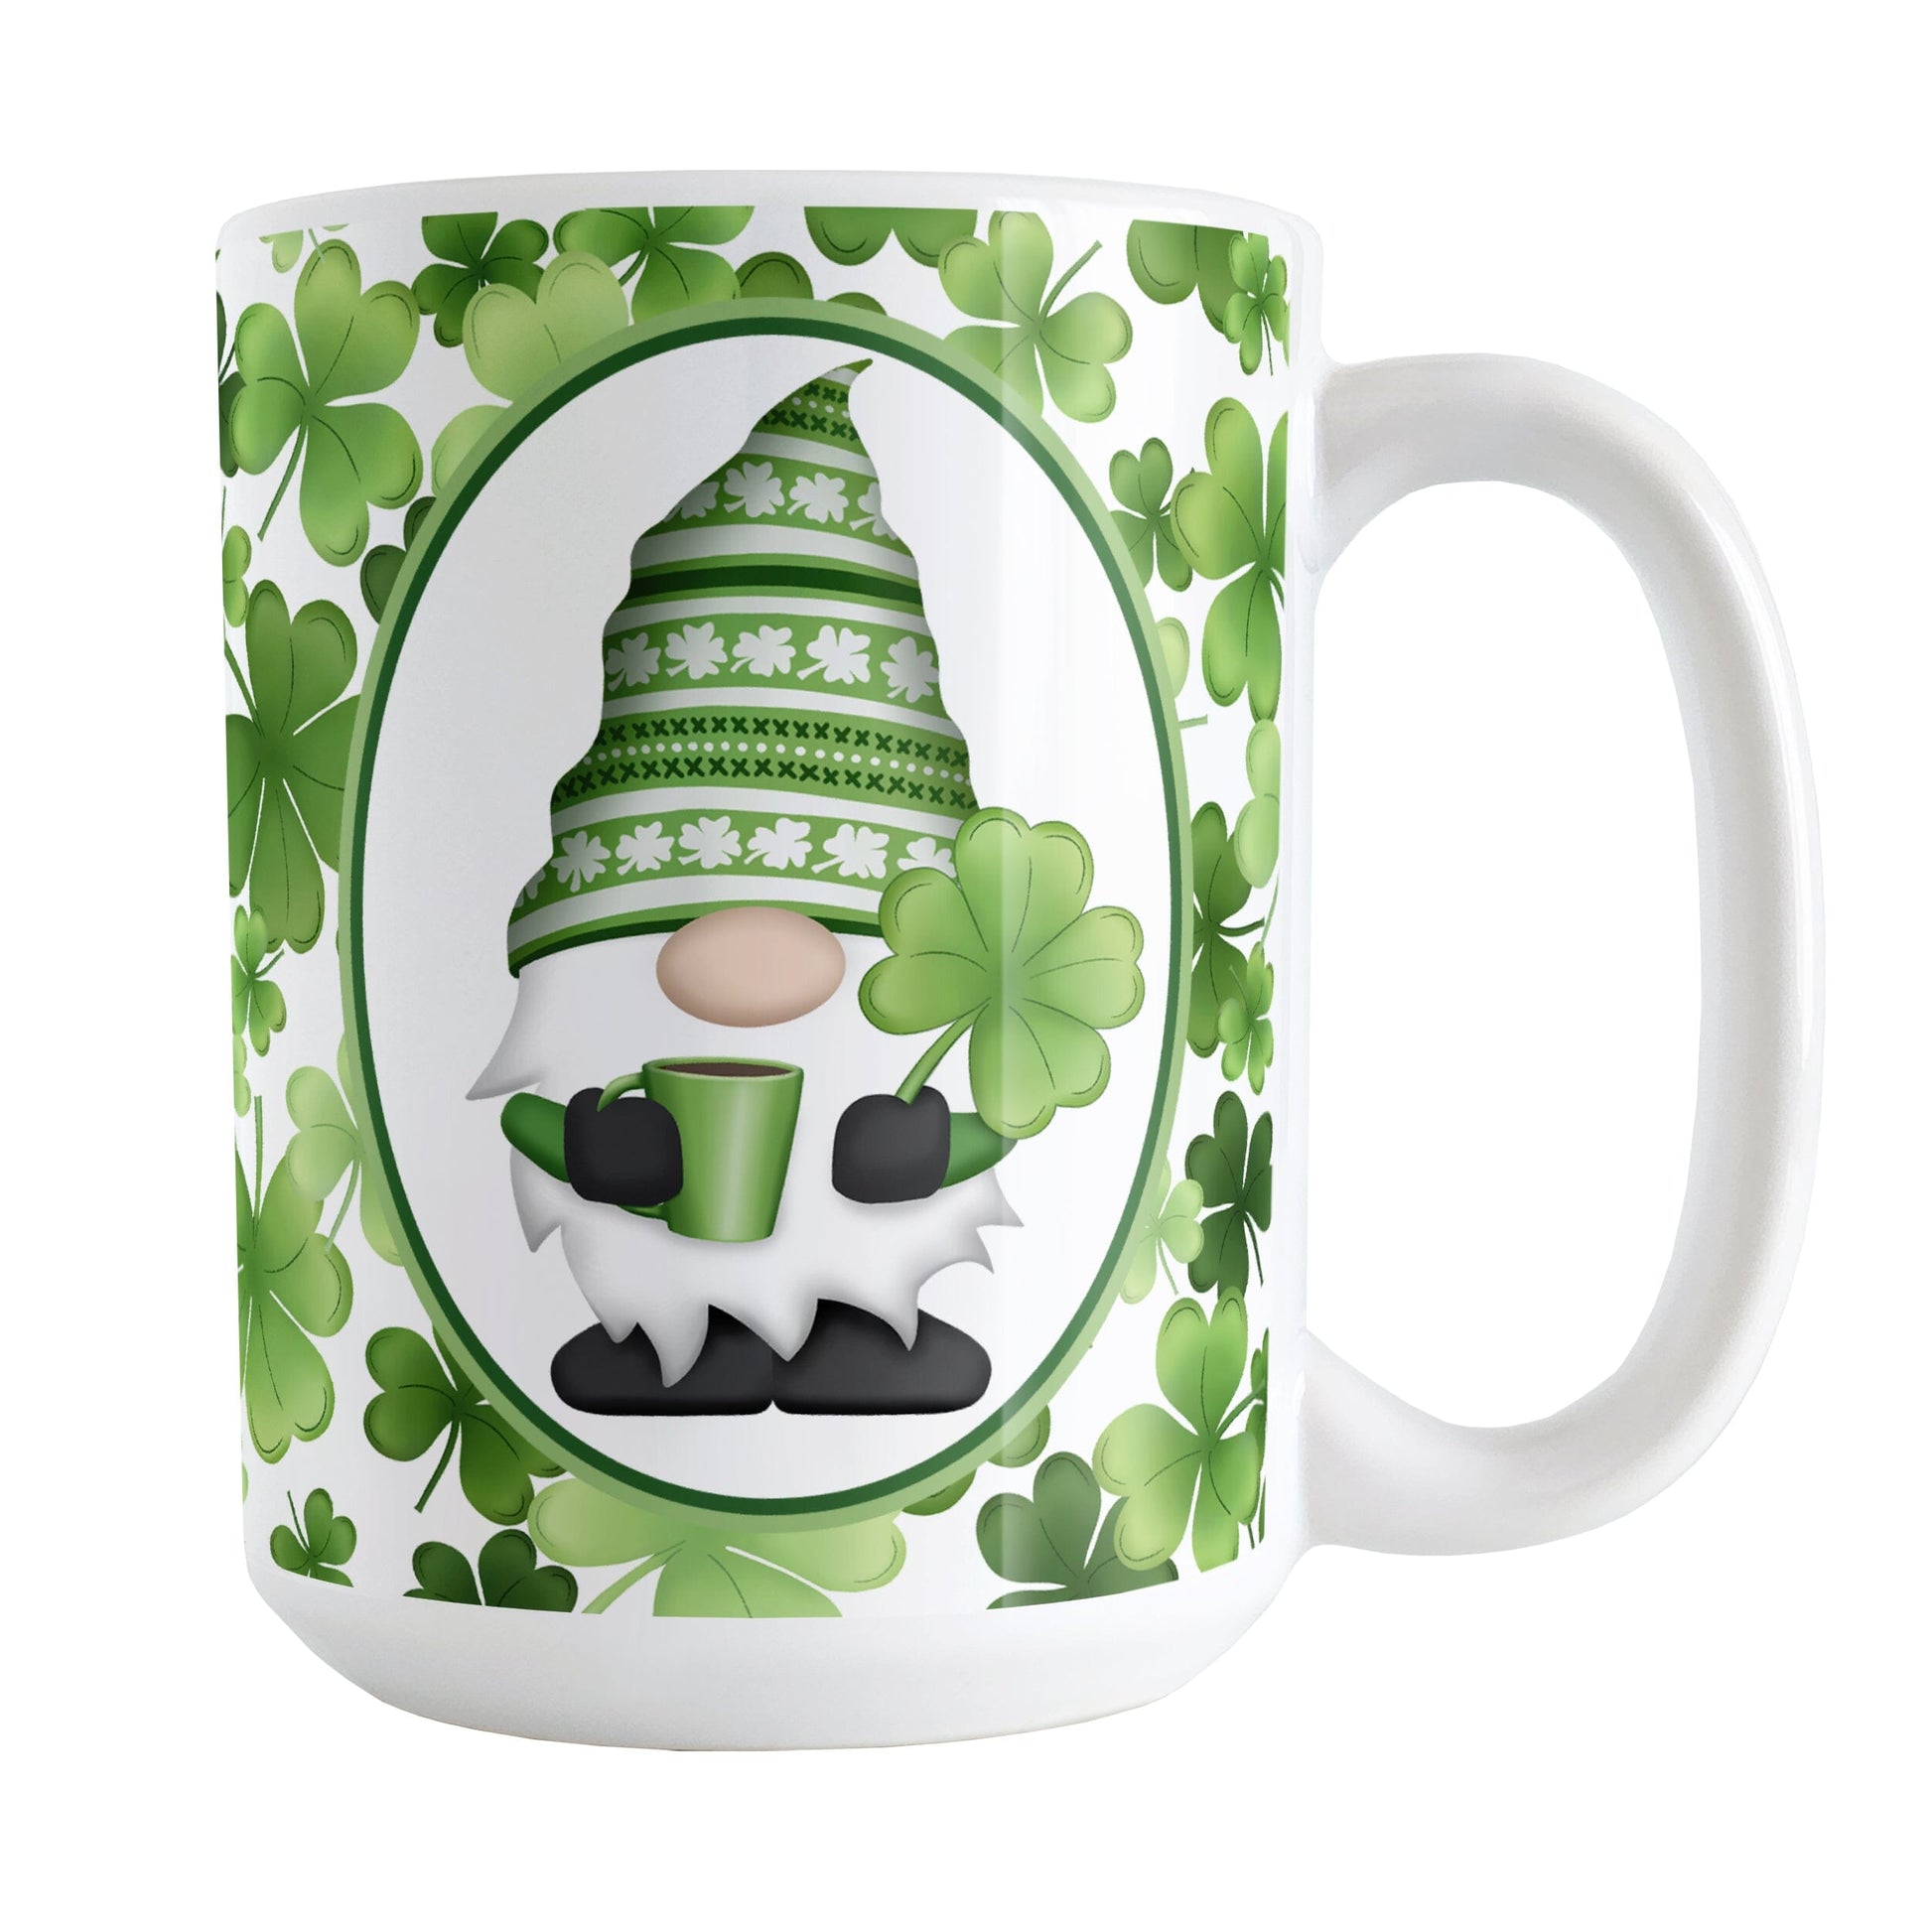 Green Gnome Shamrocks Mug (15oz) at Amy's Coffee Mugs. A ceramic coffee mug designed with an adorable green hat gnome holding a 4-leaf clover and a hot beverage in a white oval over a pattern of green shamrocks in different shades of green that wrap around the mug to the handle.